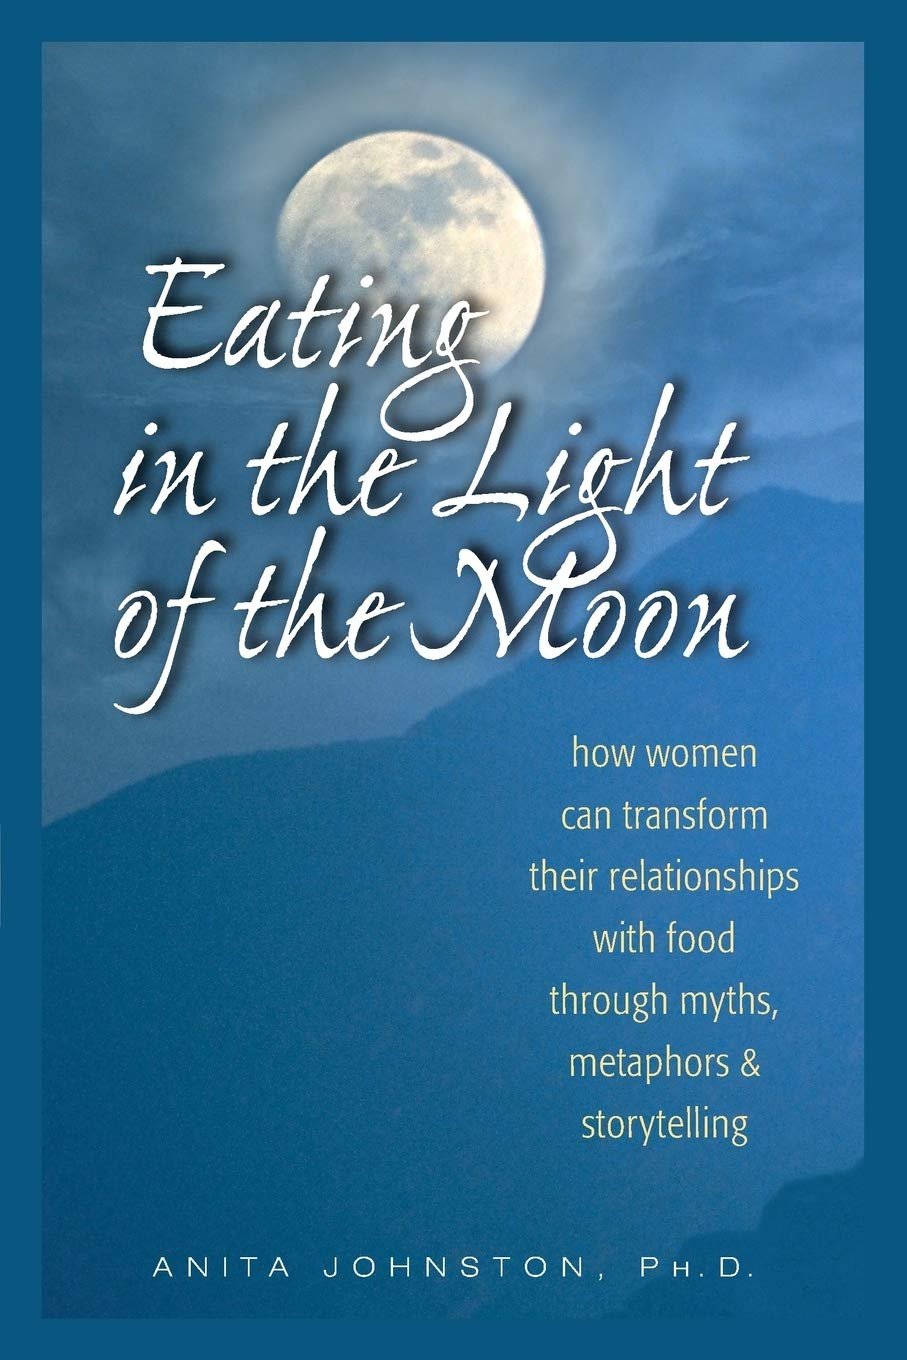 Eating In The Light Of The Moon: How Women Can Transform Their Relationship With Food Through Myths, Metaphors and Story Telling	Anita Johnston, PhD.	https://amzn.to/3TX7Kpf																							